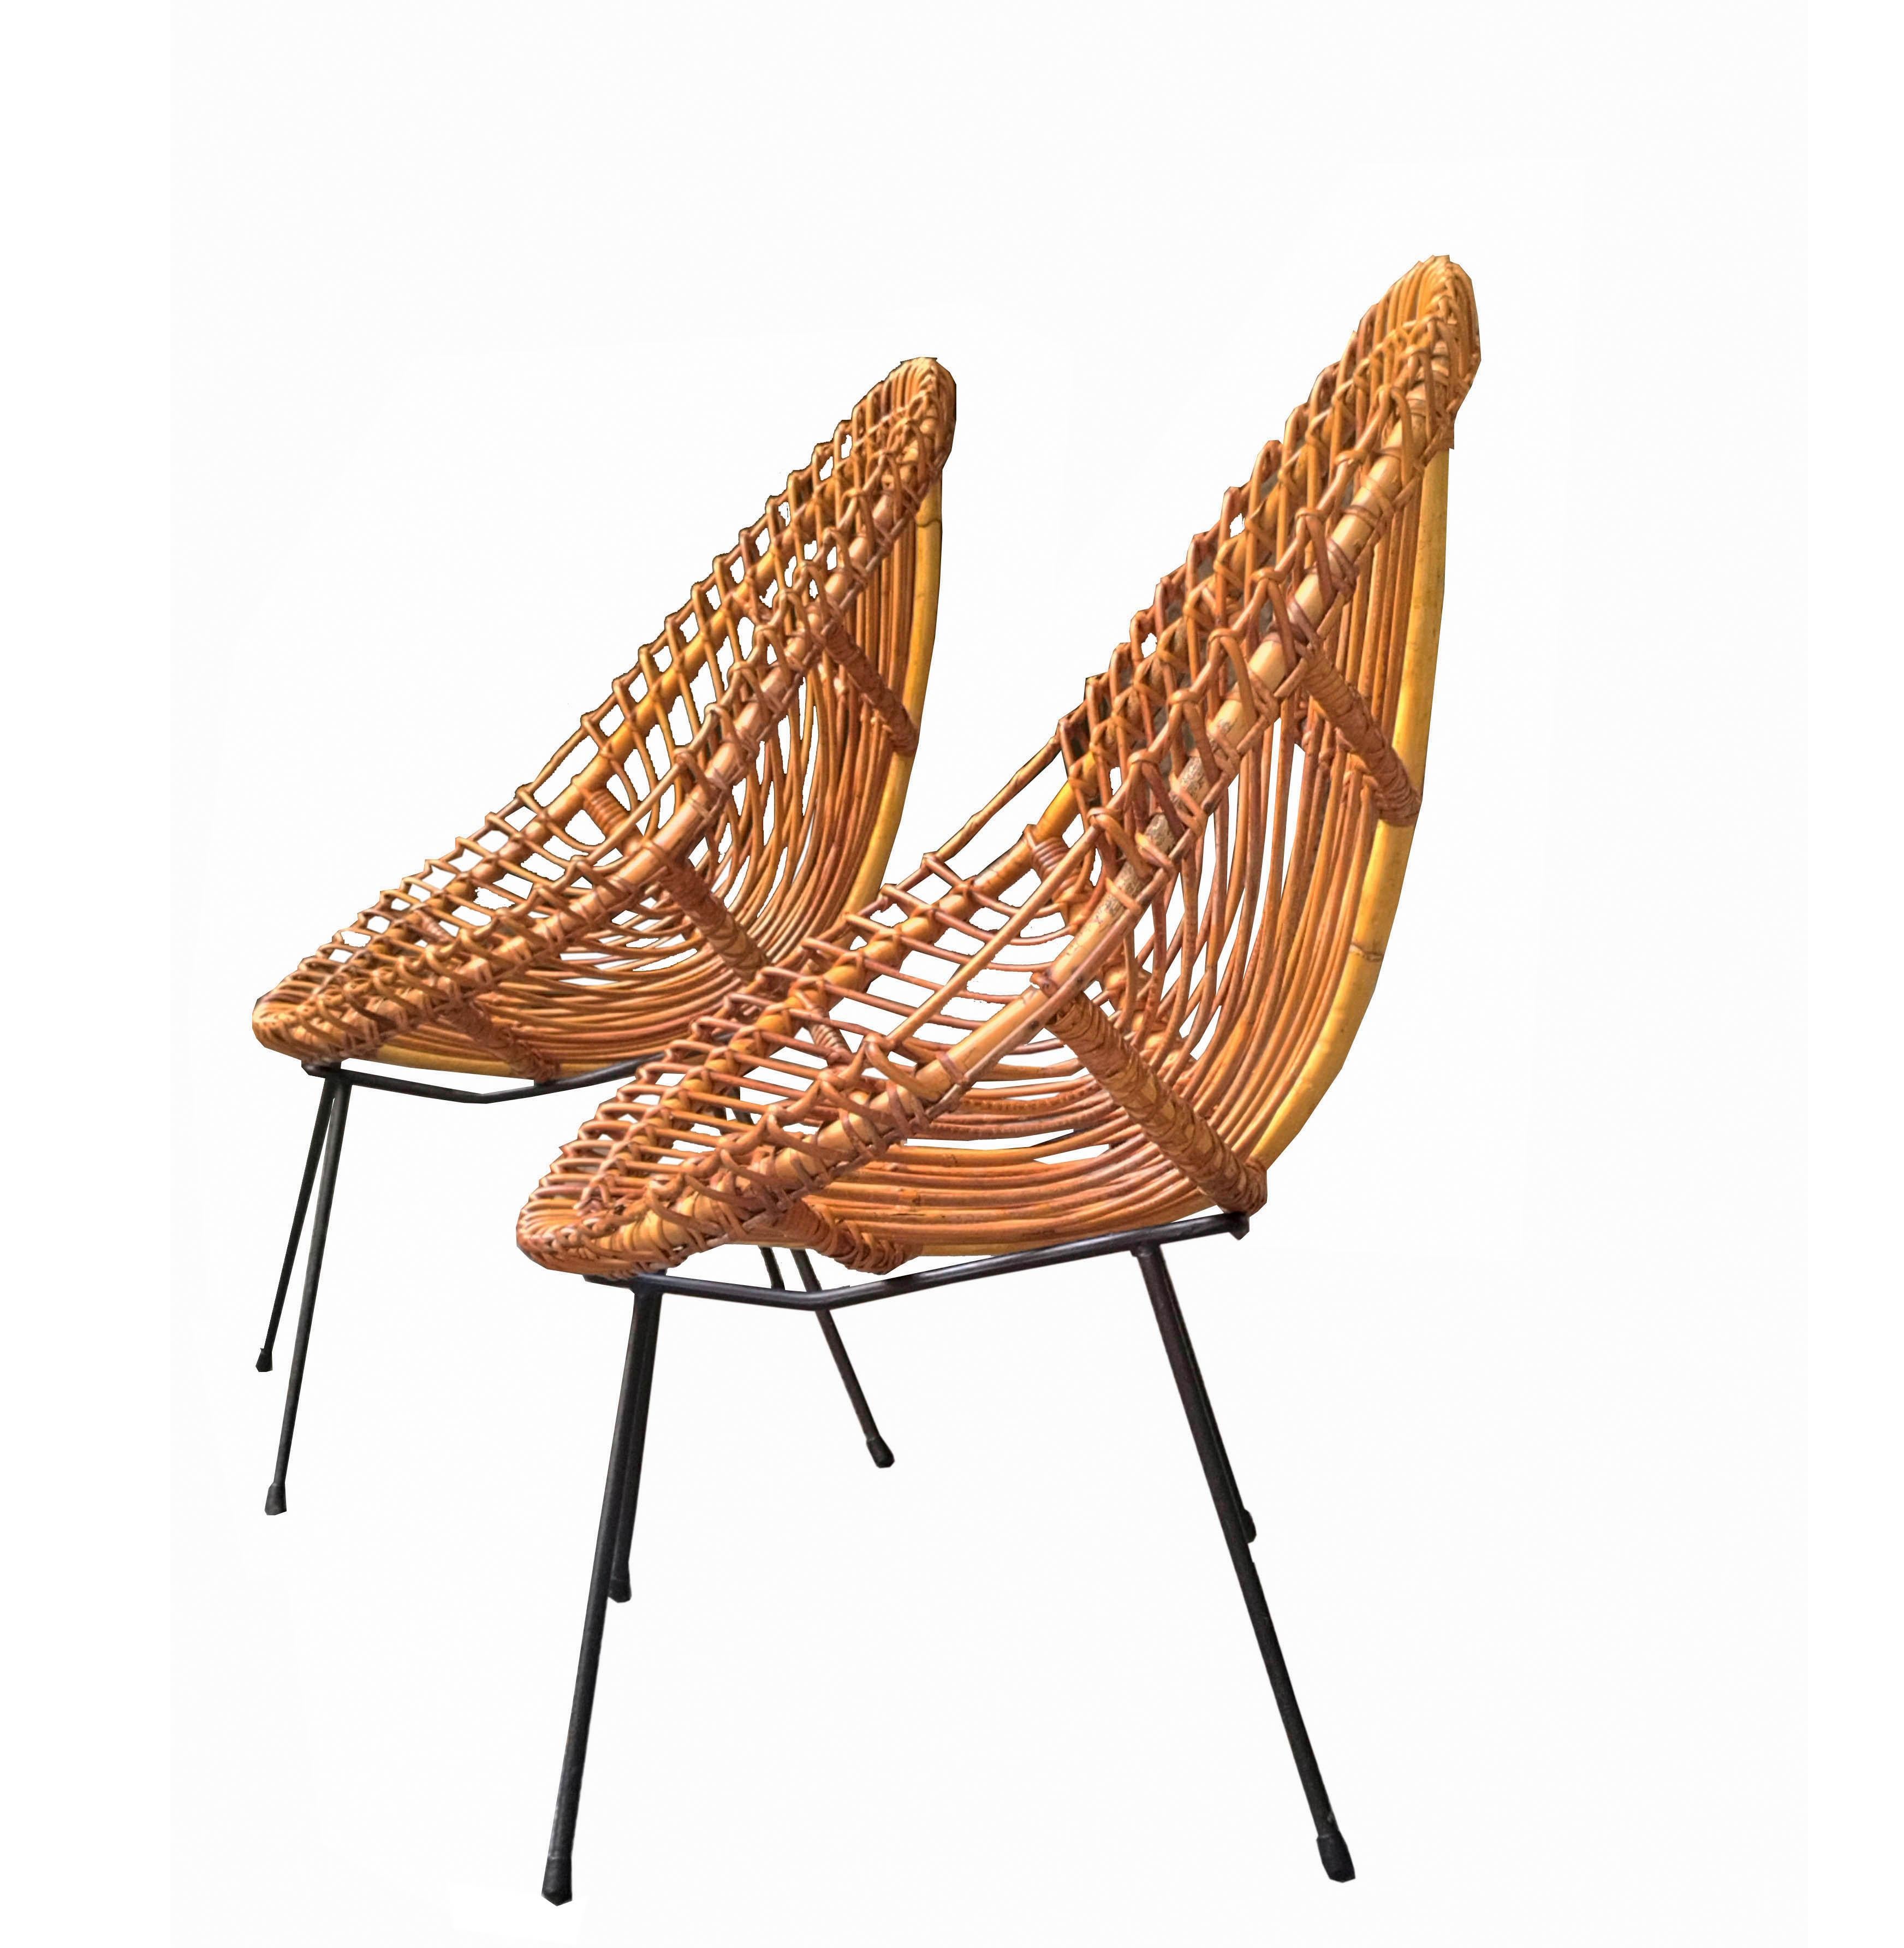 Pair of armchairs designed by Franco Albini in the 1960s. Light and comfortable rattan shell-shaped seats. Black lacquered tubular metal base. 